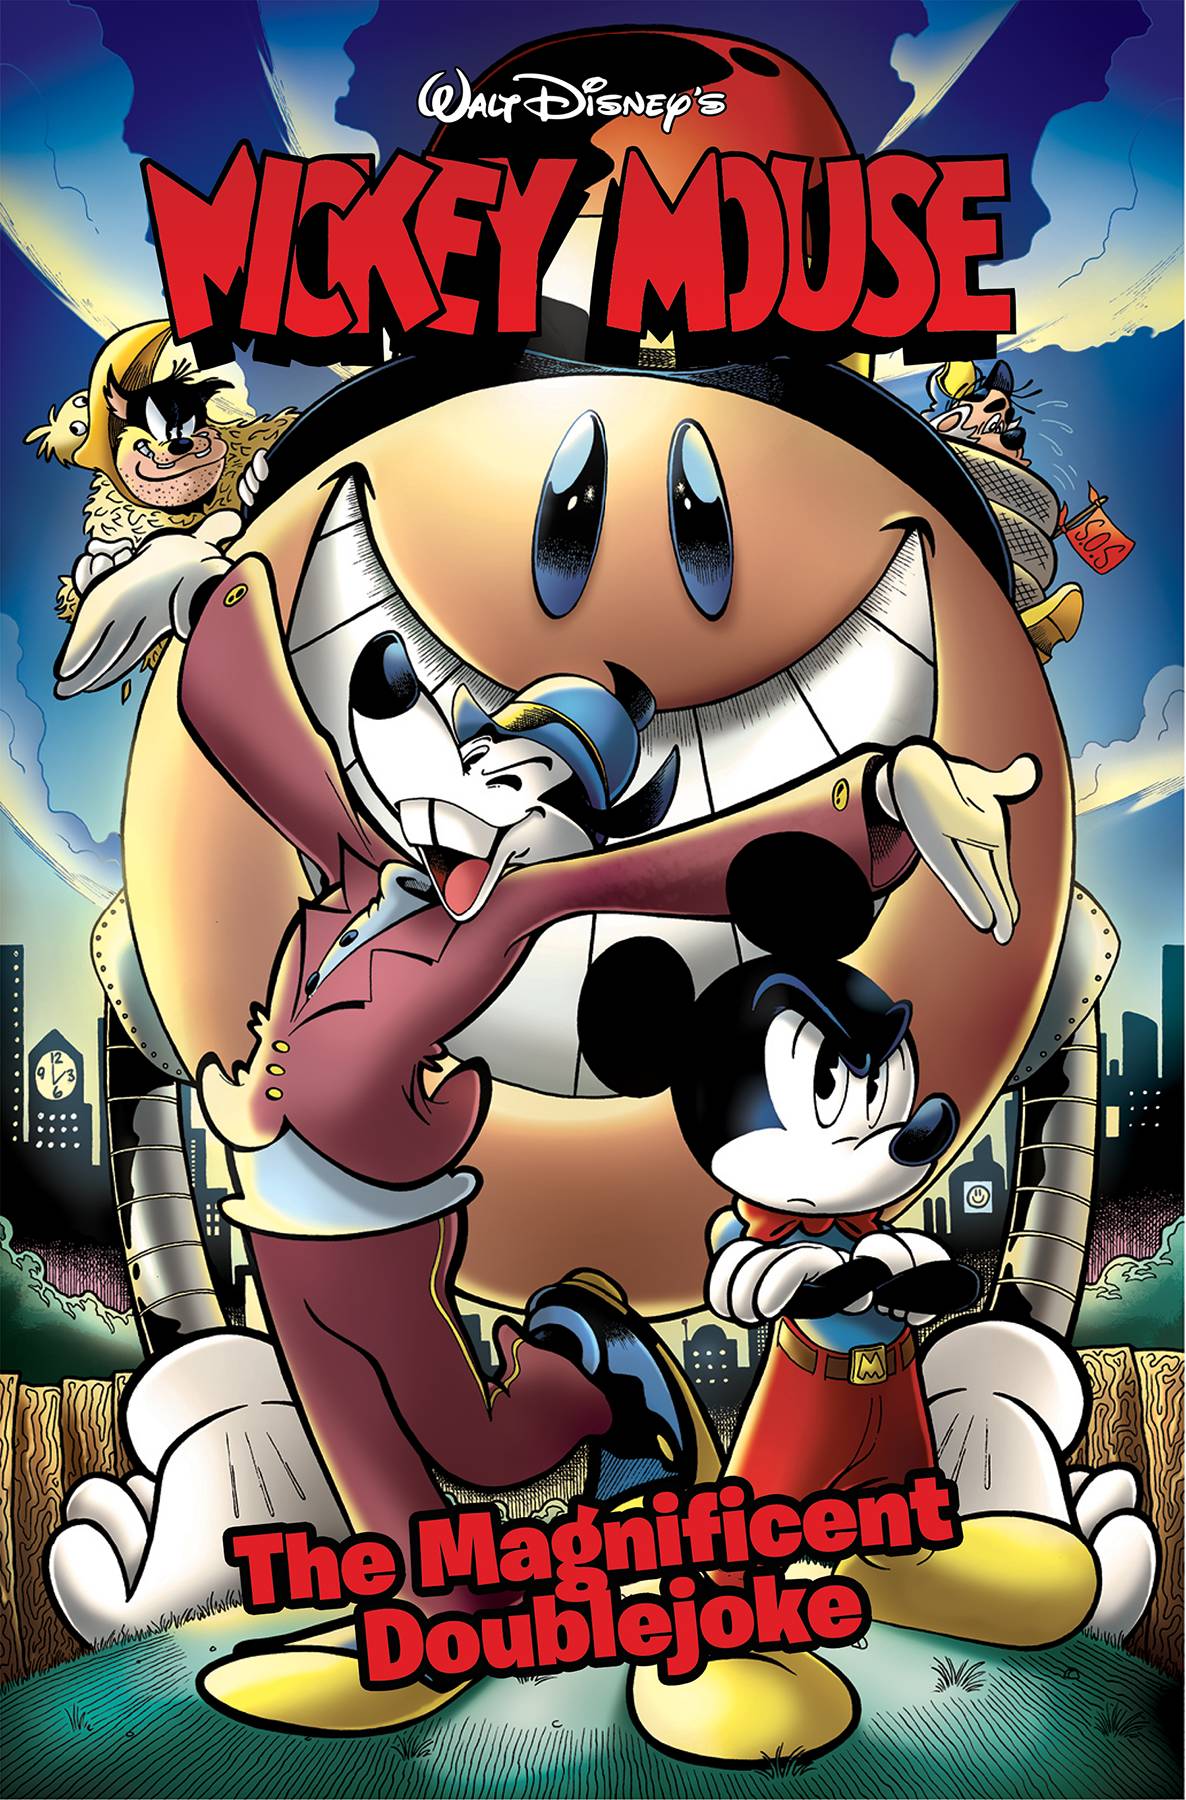 Mickey Mouse Graphic Novel Volume 7 Magnificent Doublejoke